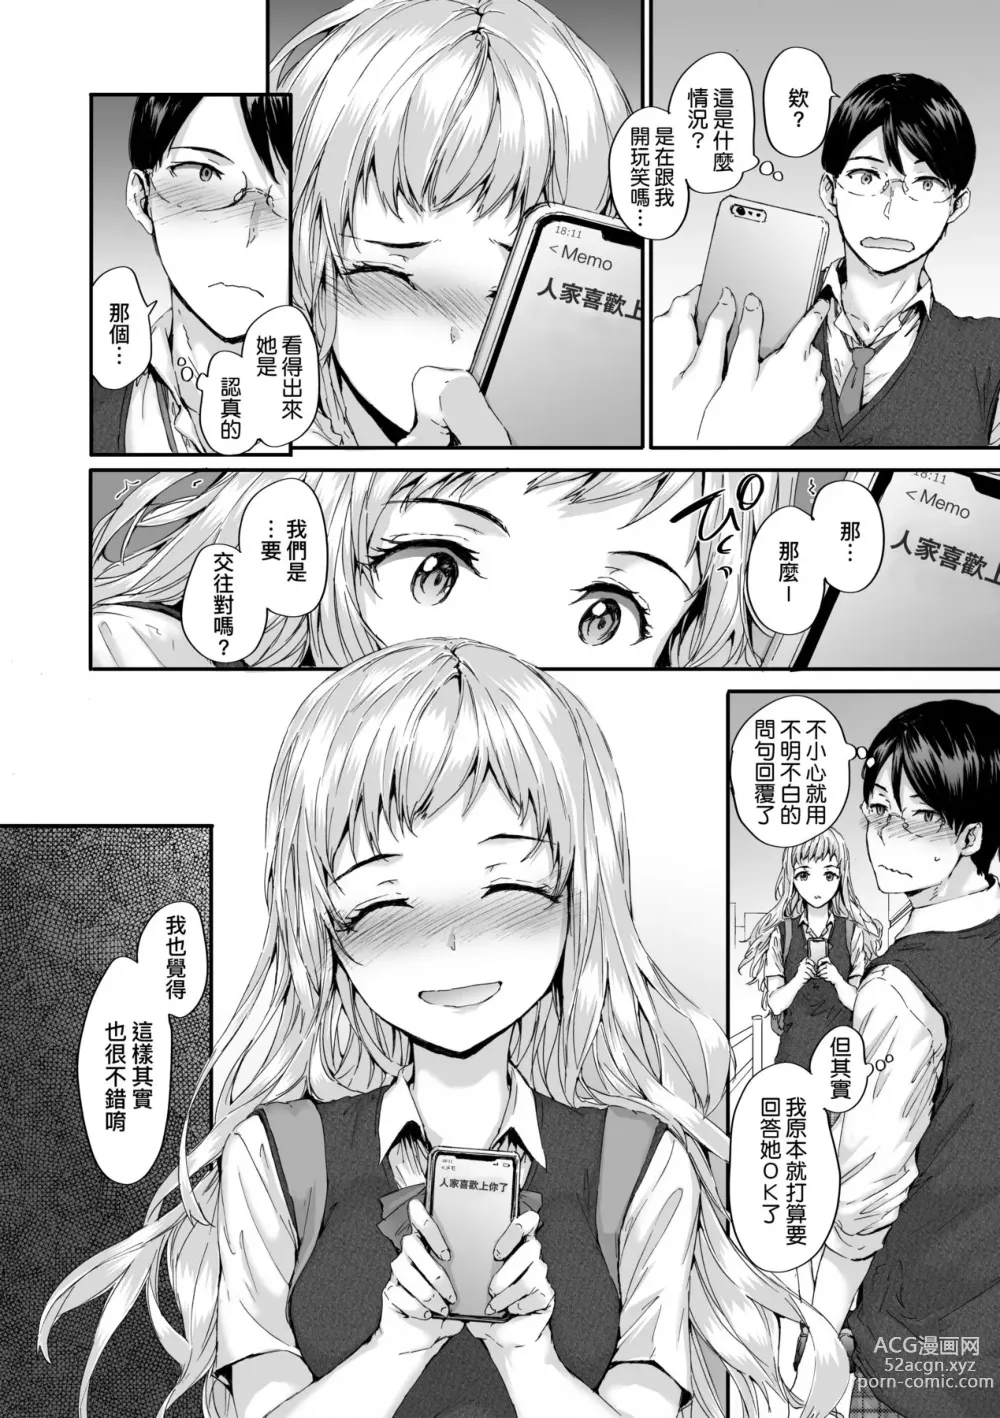 Page 6 of doujinshi Say you love me with your mouth